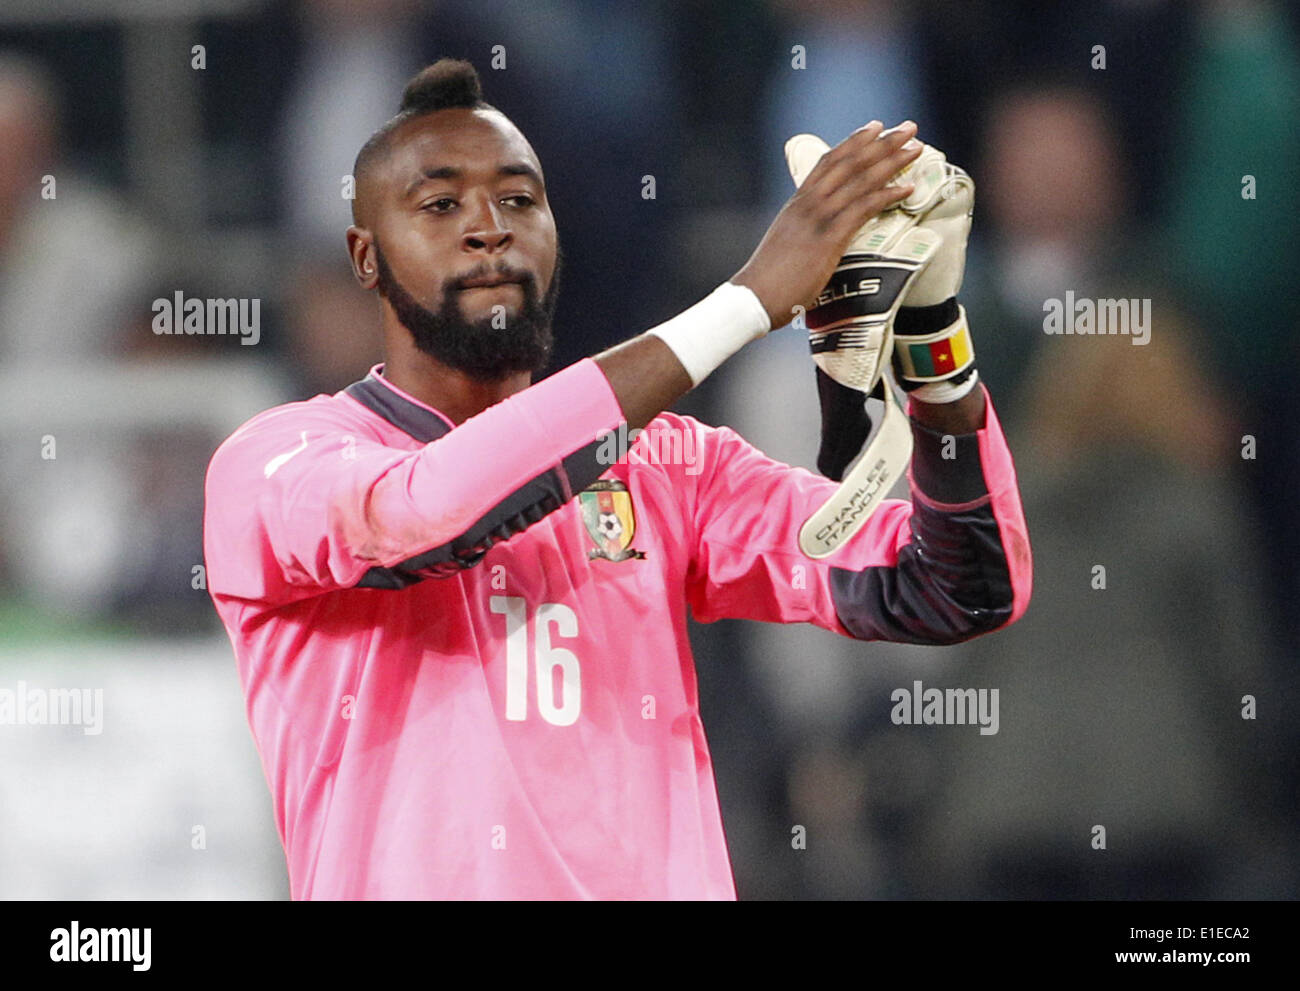 Moenchengladbach, Germany. 01st June, 2014. Cameroon's goalkeeper Charles Itandje during the friendly soccer match between Germany and Cameroon at the Borussia Park stadium in Moenchengladbach, Germany, 01 June 2014. Photo: Roland Weihrauch/dpa/Alamy Live News Stock Photo